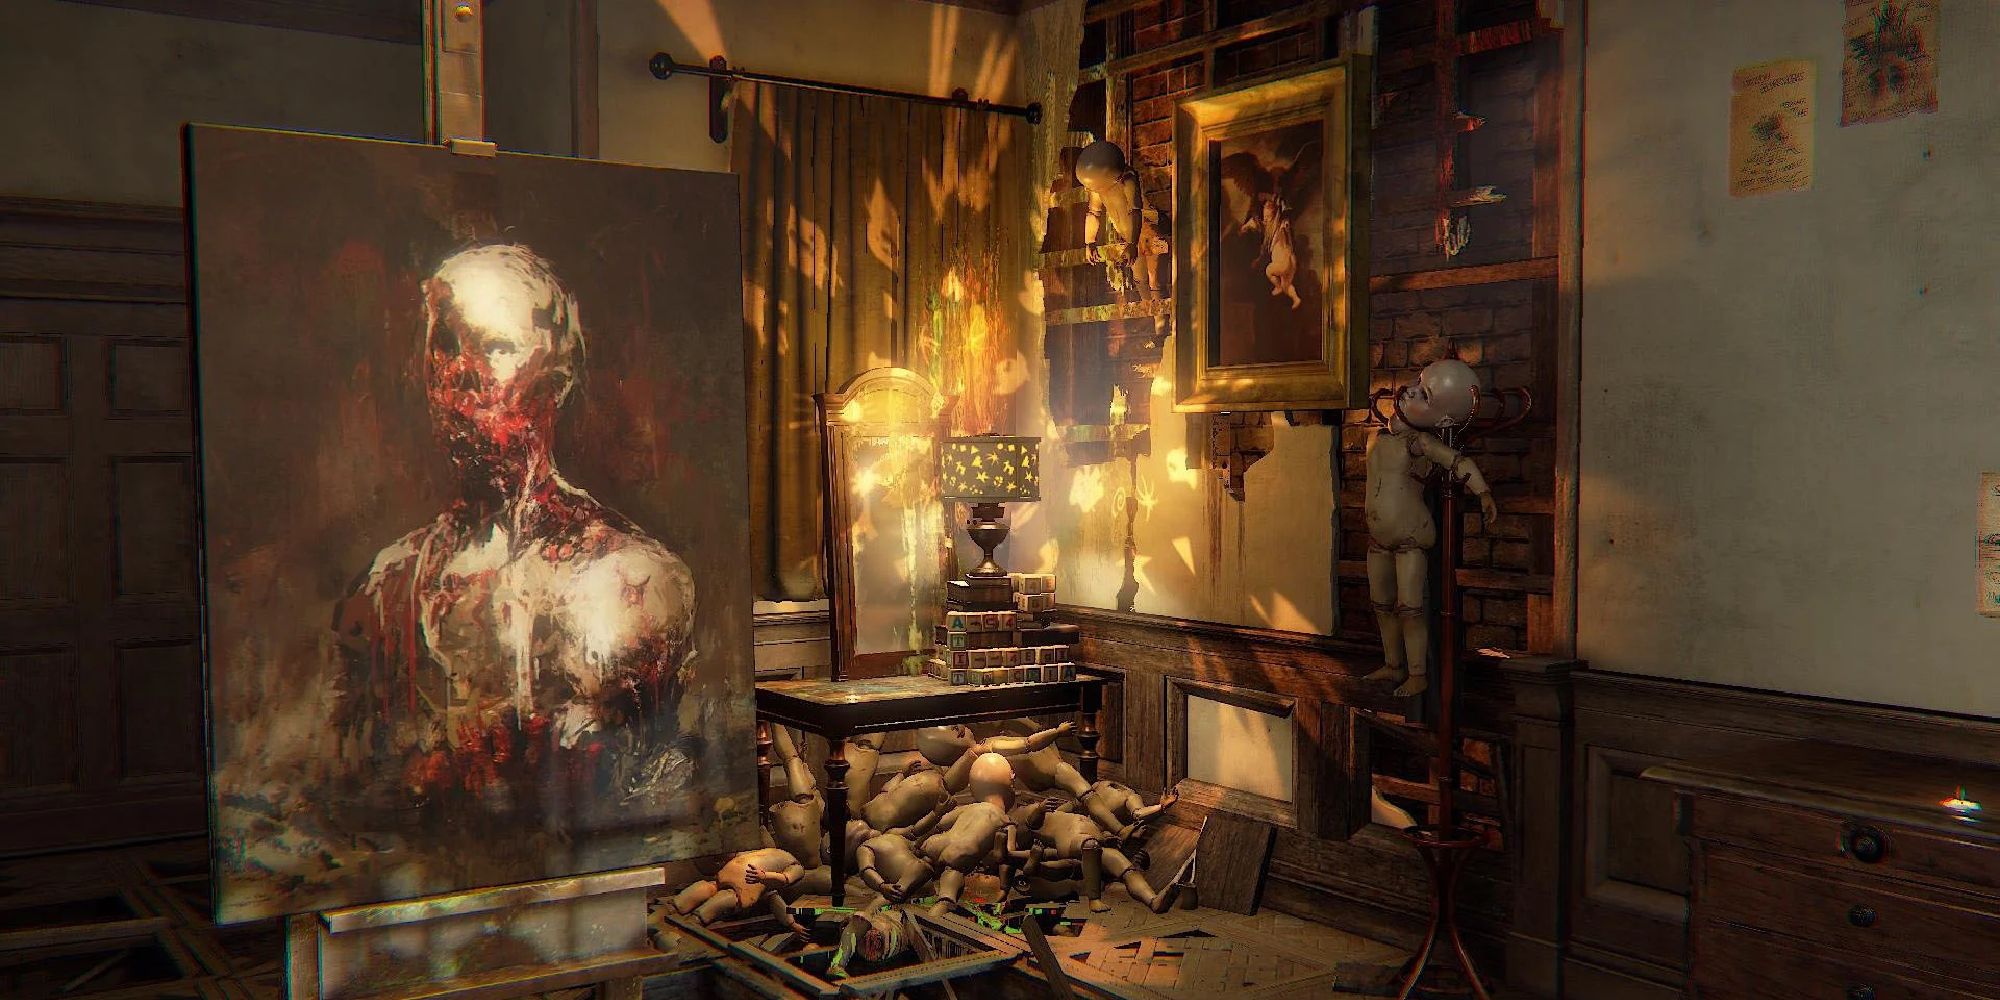 The hub in Layers of Fear, showing a painting of a humanoid like creature and many porcelain dolls in the background.